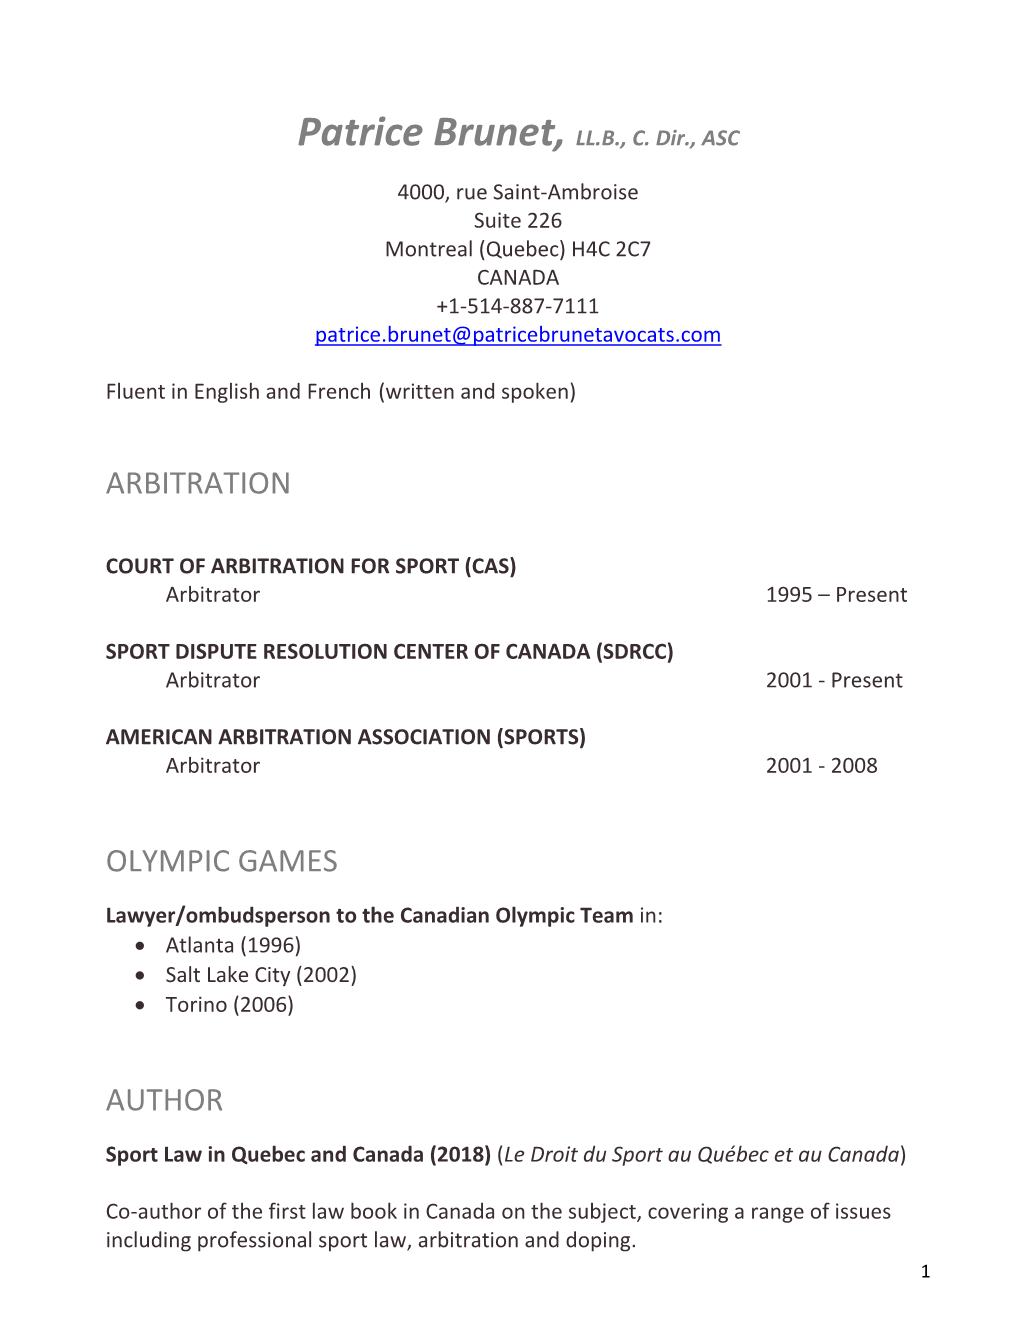 Arbitration Olympic Games Author